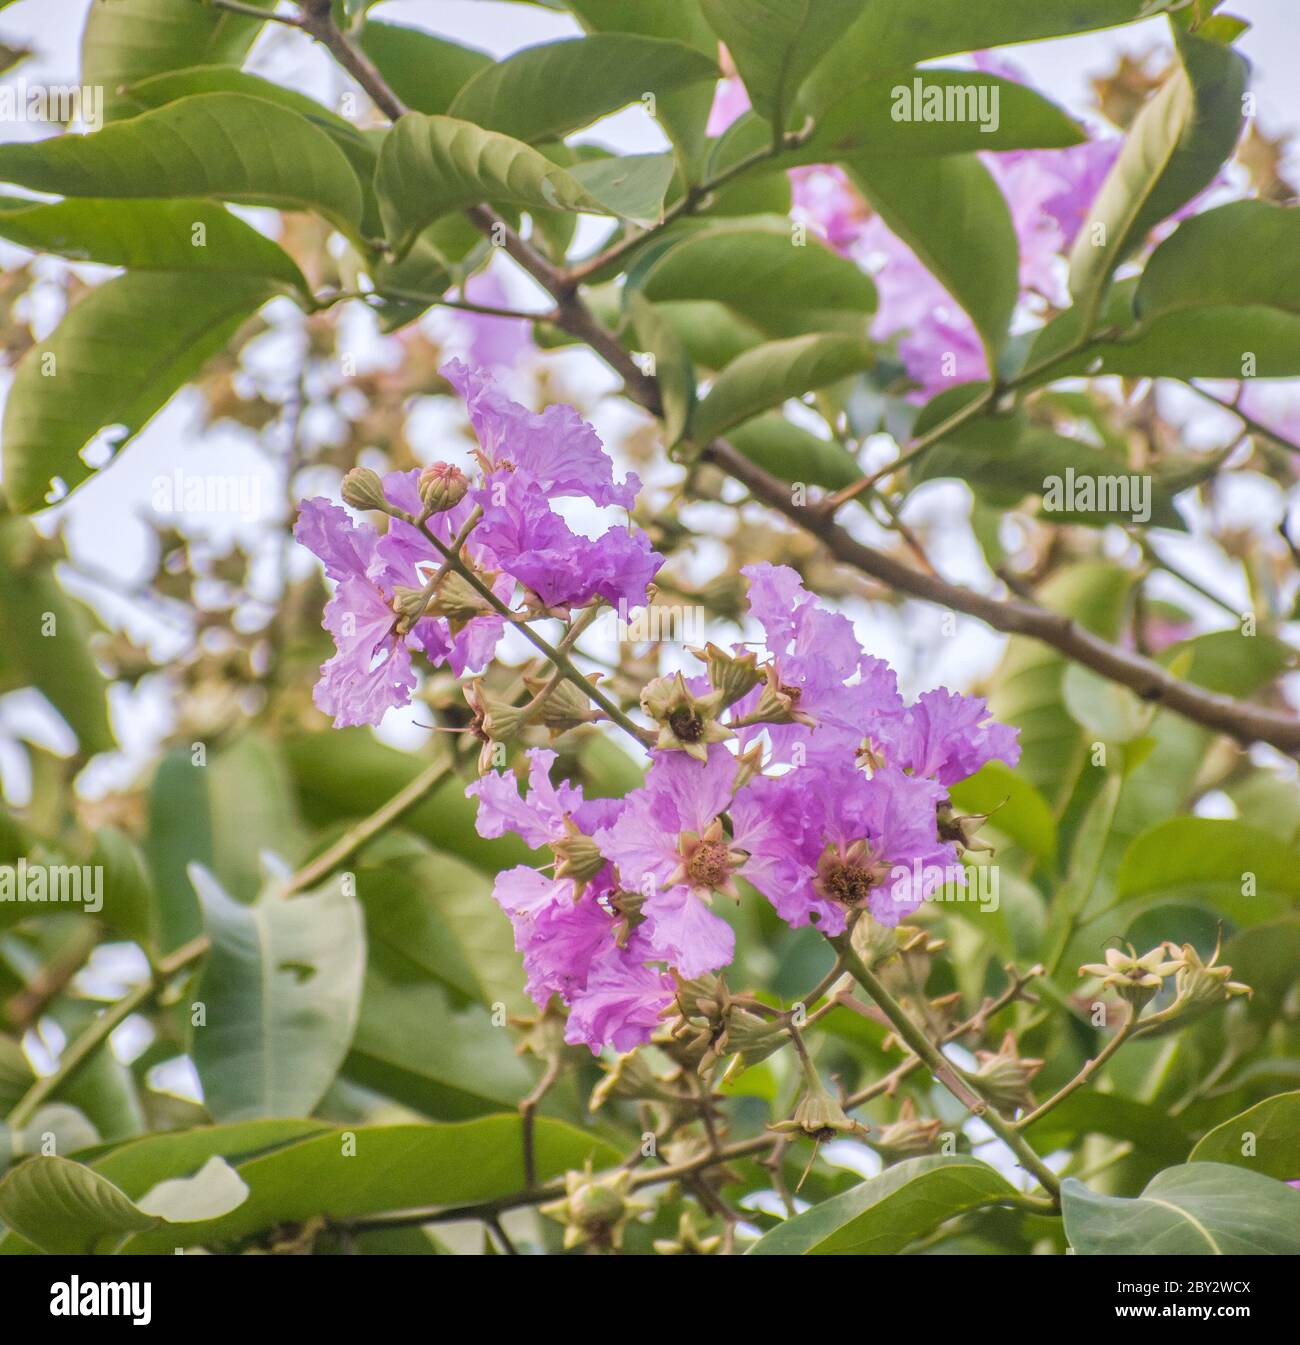 Lagerstroemia floribunda, also known as Thai crape myrtle and kedah bungor, is a species of flowering plant in the family Lythraceae. It is native of Stock Photo